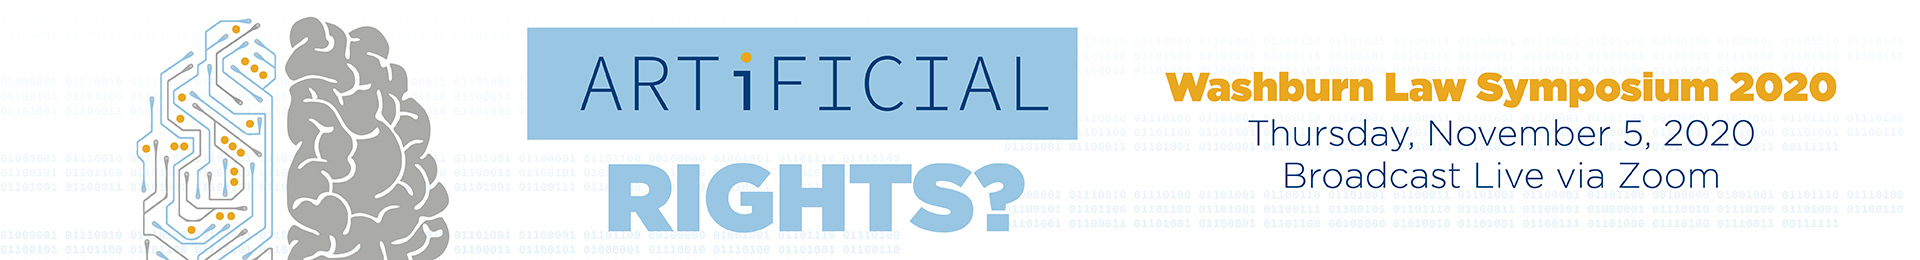 Graphic: Masthead for Artificial Rights? Symposium.